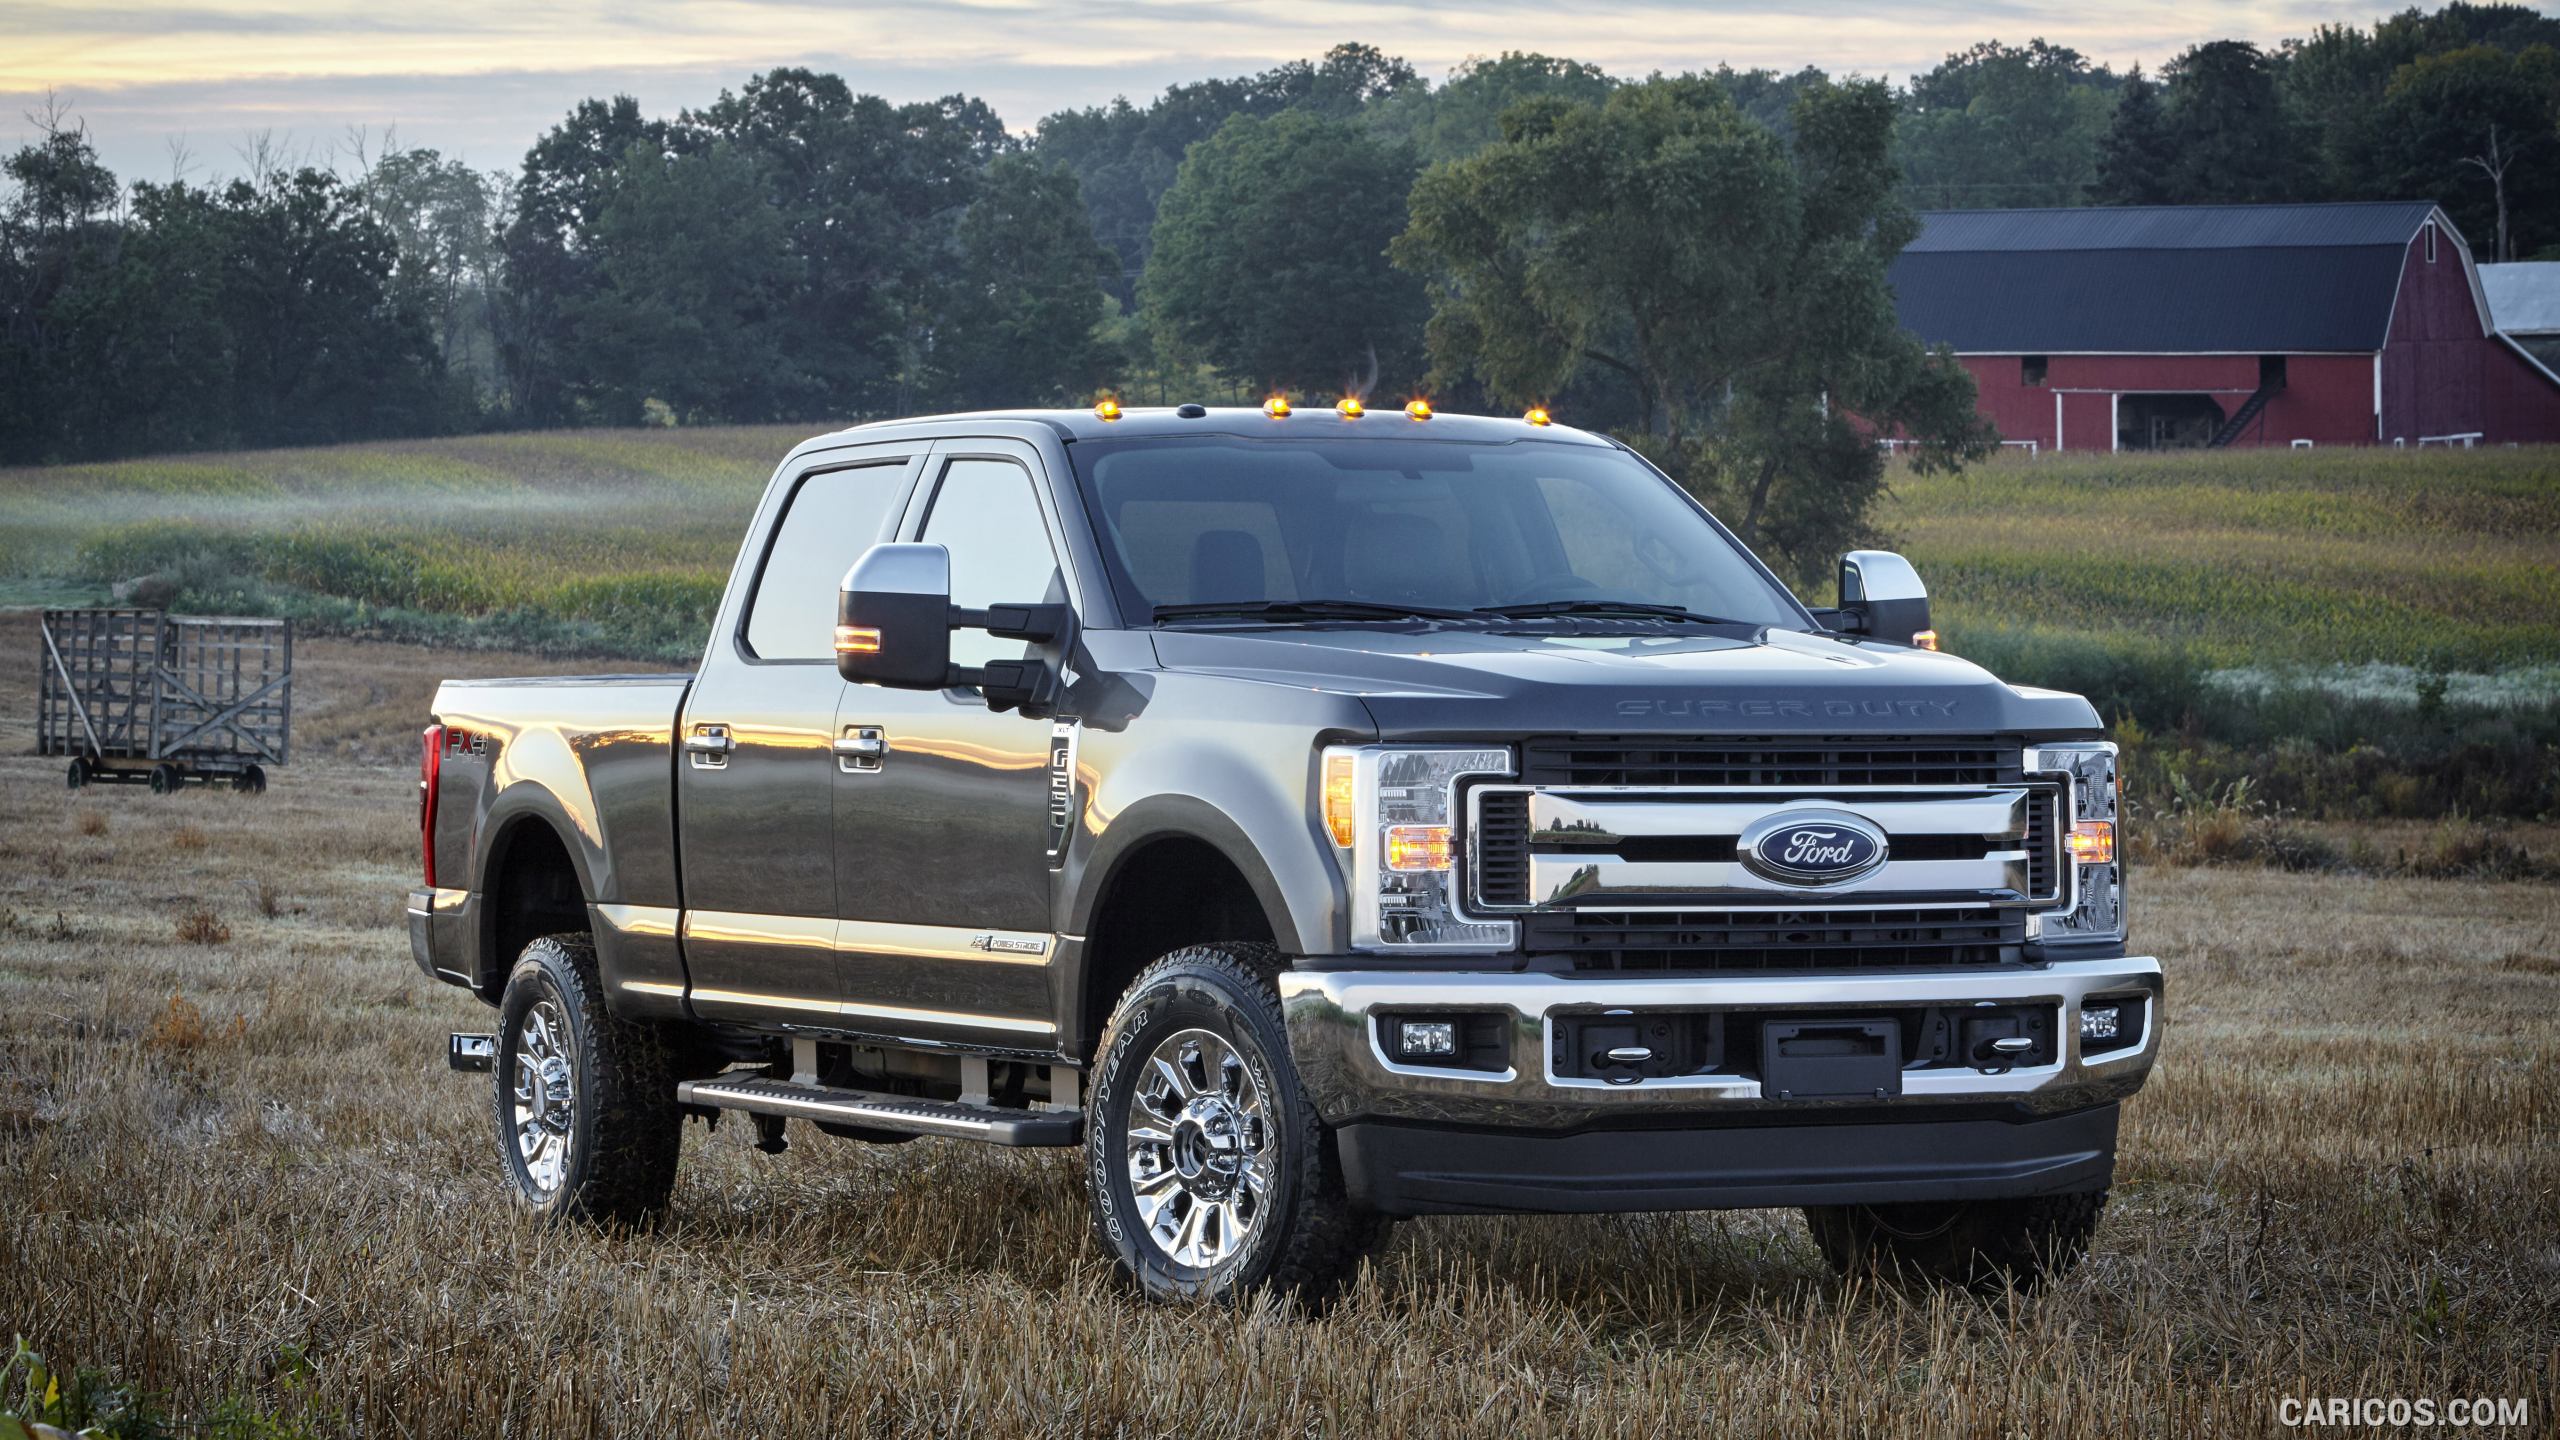 Ford F250 Wallpapers on